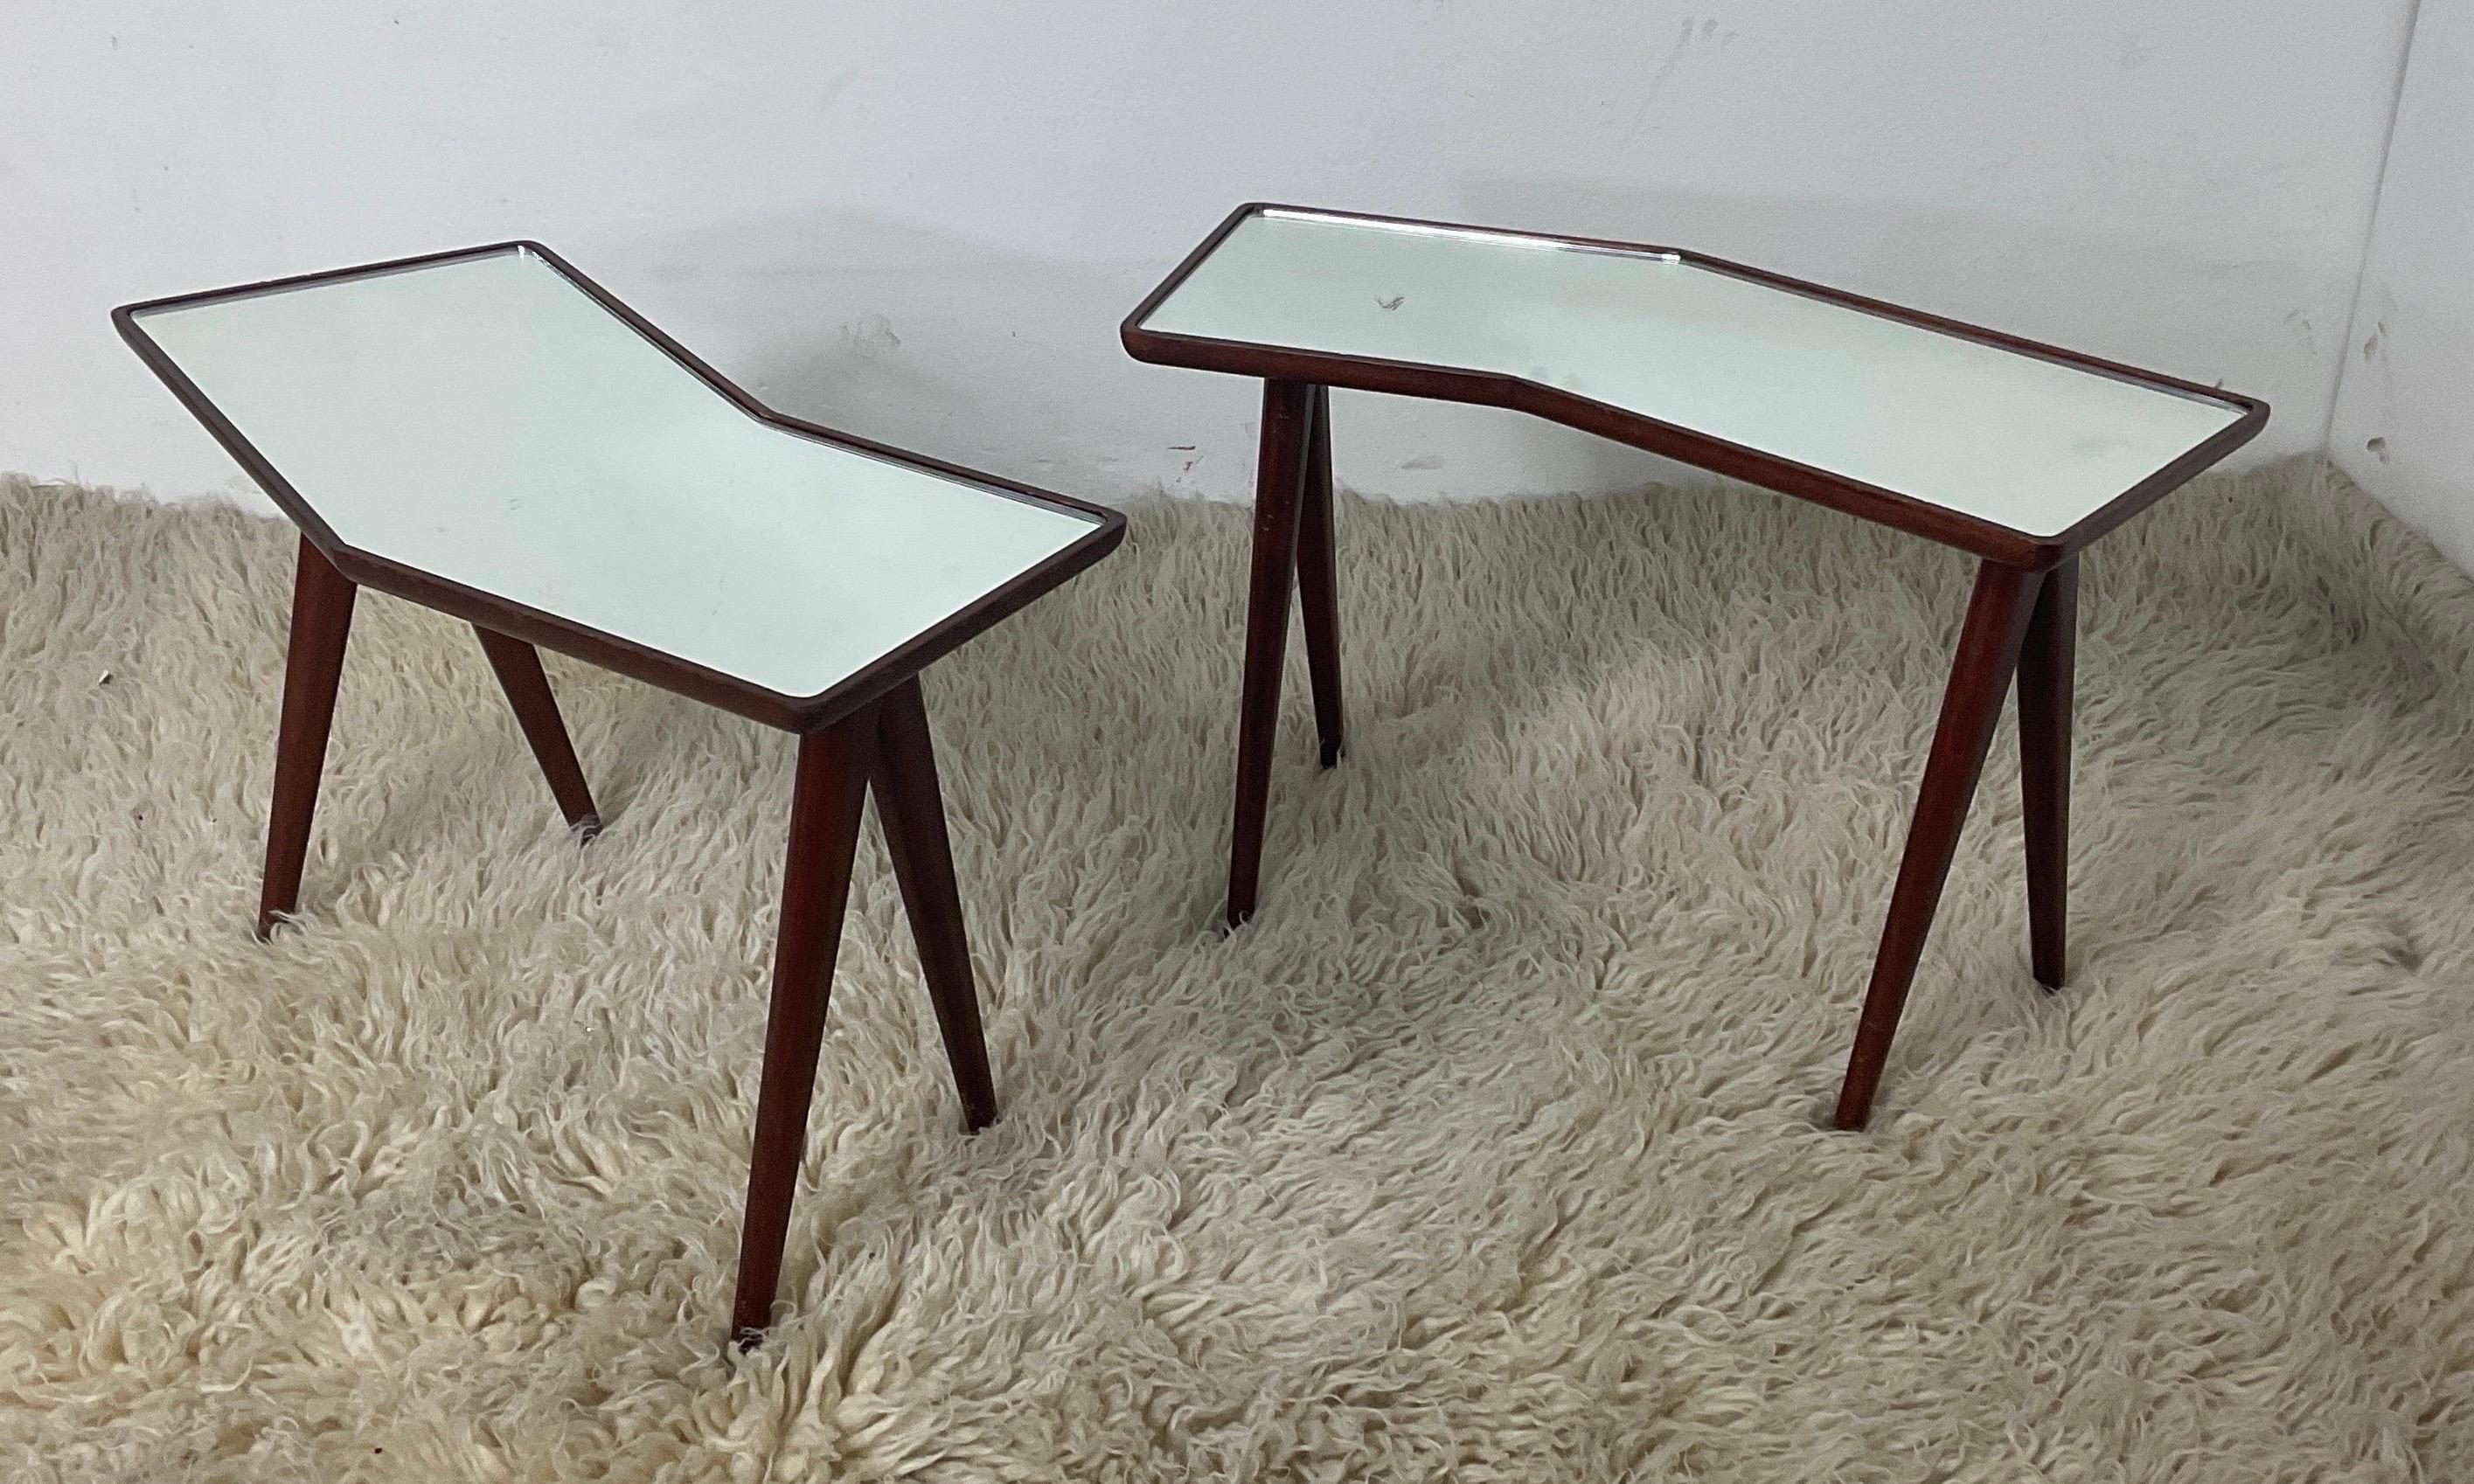 Pair of beautiful coffee tables with trapezoidal shape. The frame is made entirely of wood and the top is made entirely of mirrored glass. Design Gio Ponti. Production Fontana Arte. 1950s.

Width 61 cm Depth 25 cm Height 40 cm